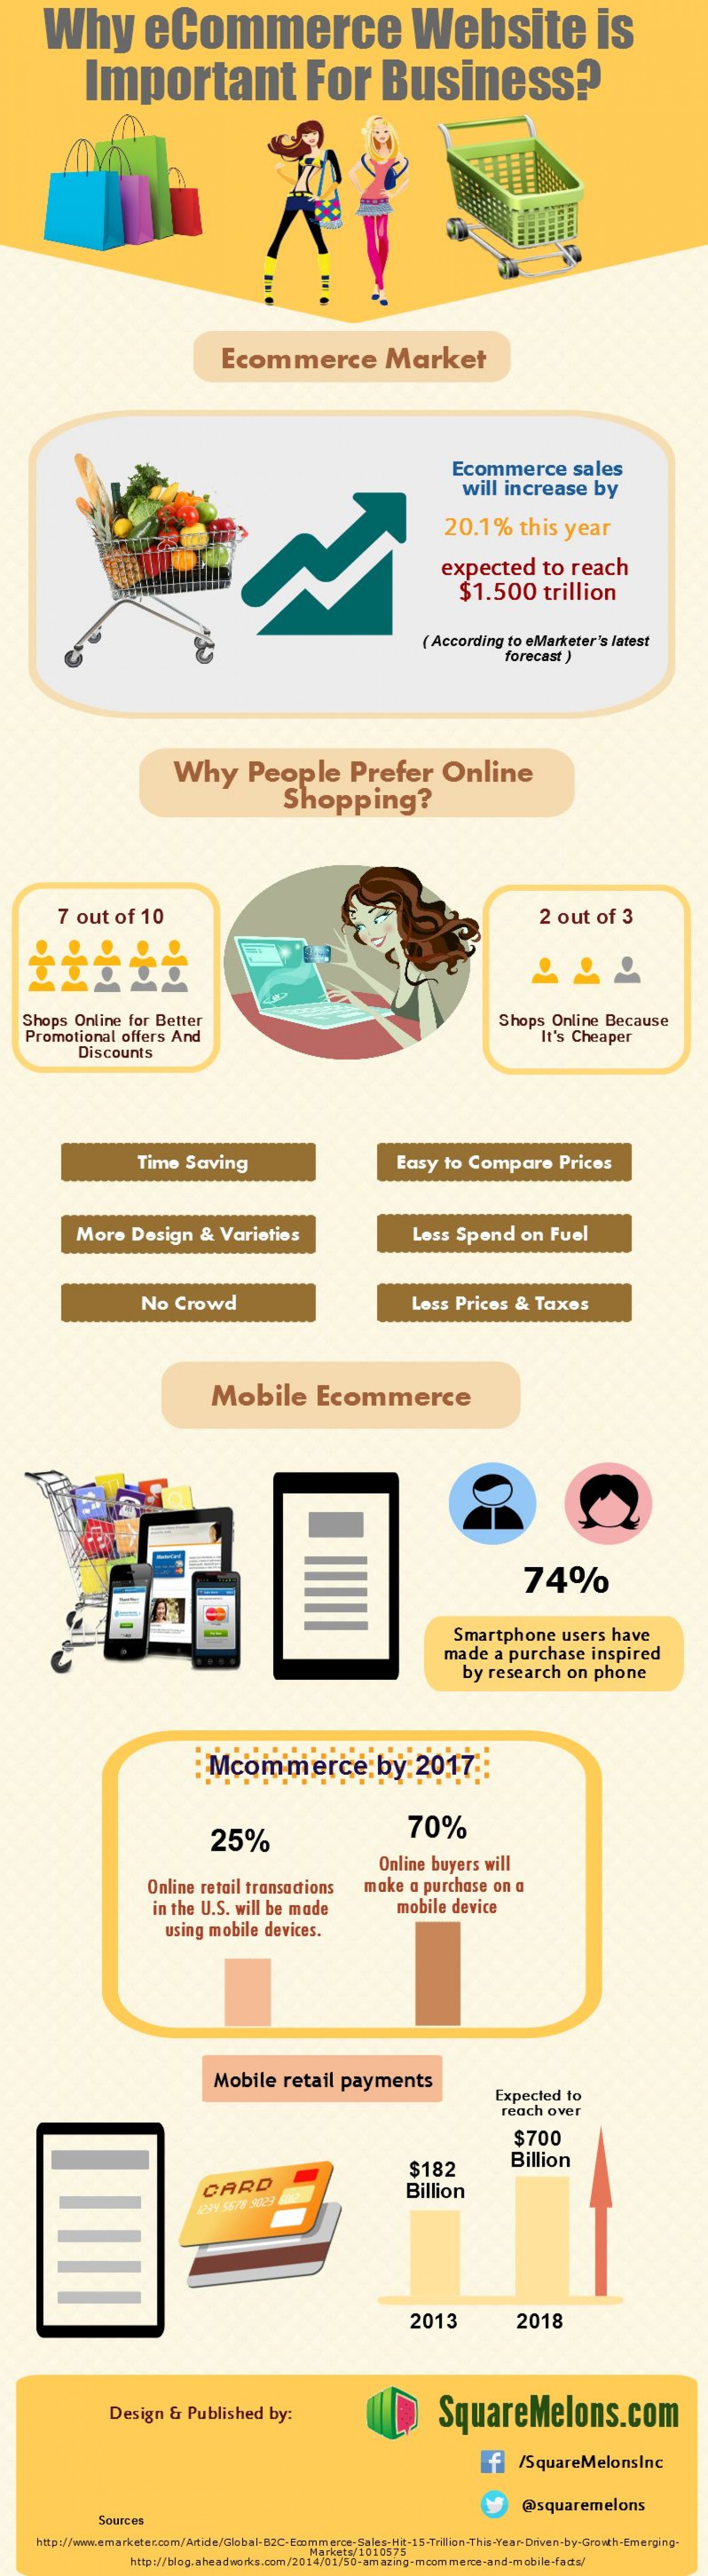 Why ecommerce website is important for business? Infographic